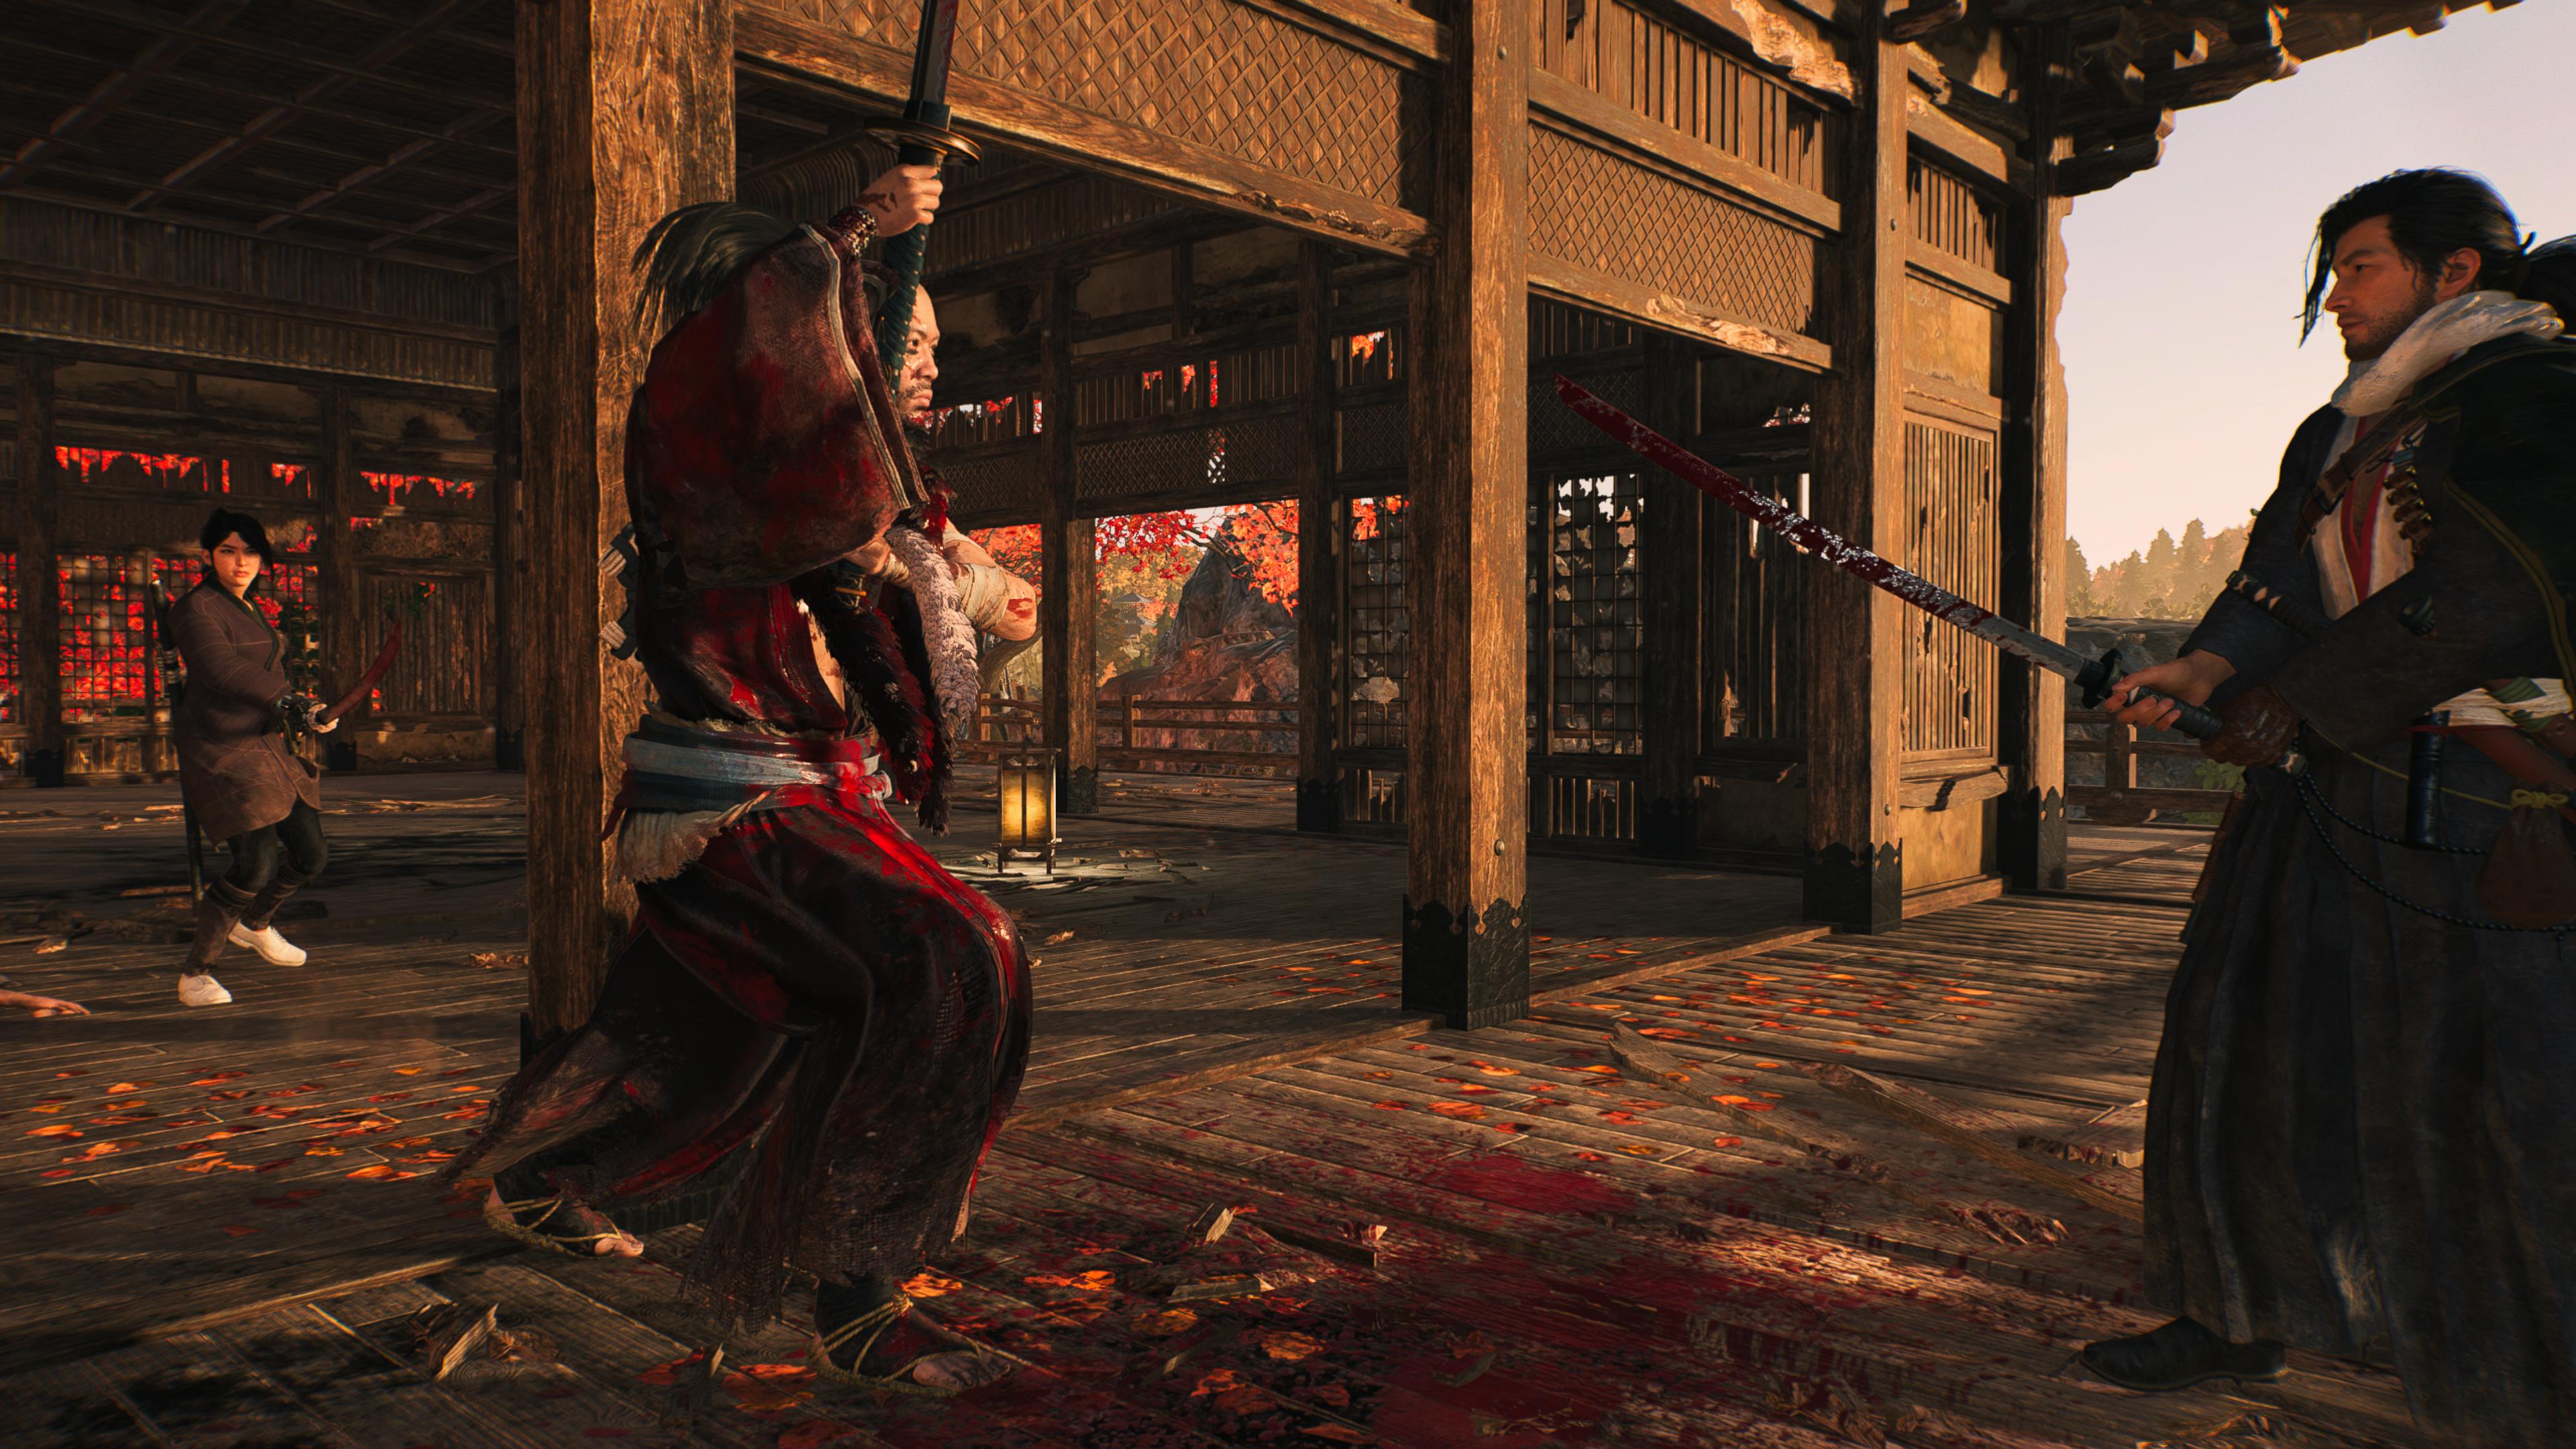 Reseña: Rise of the Ronin, ¿Vale la pena? 27